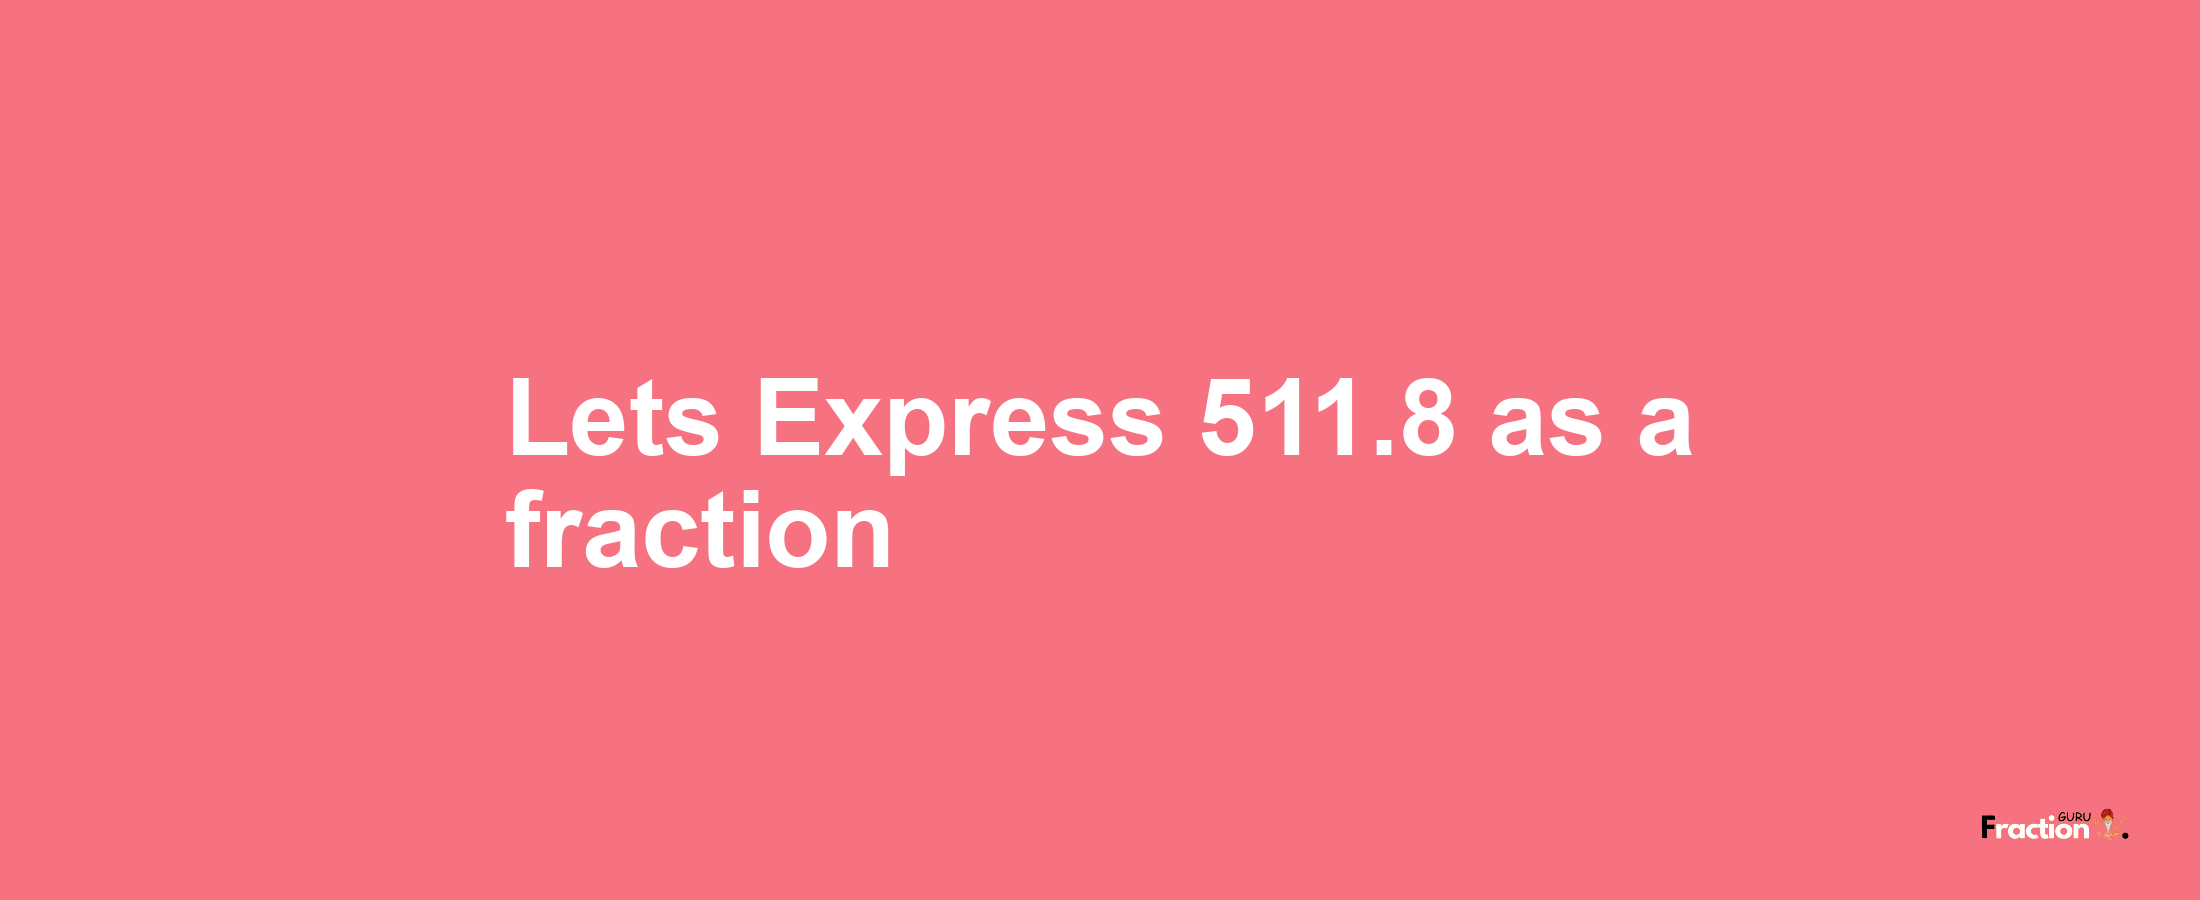 Lets Express 511.8 as afraction